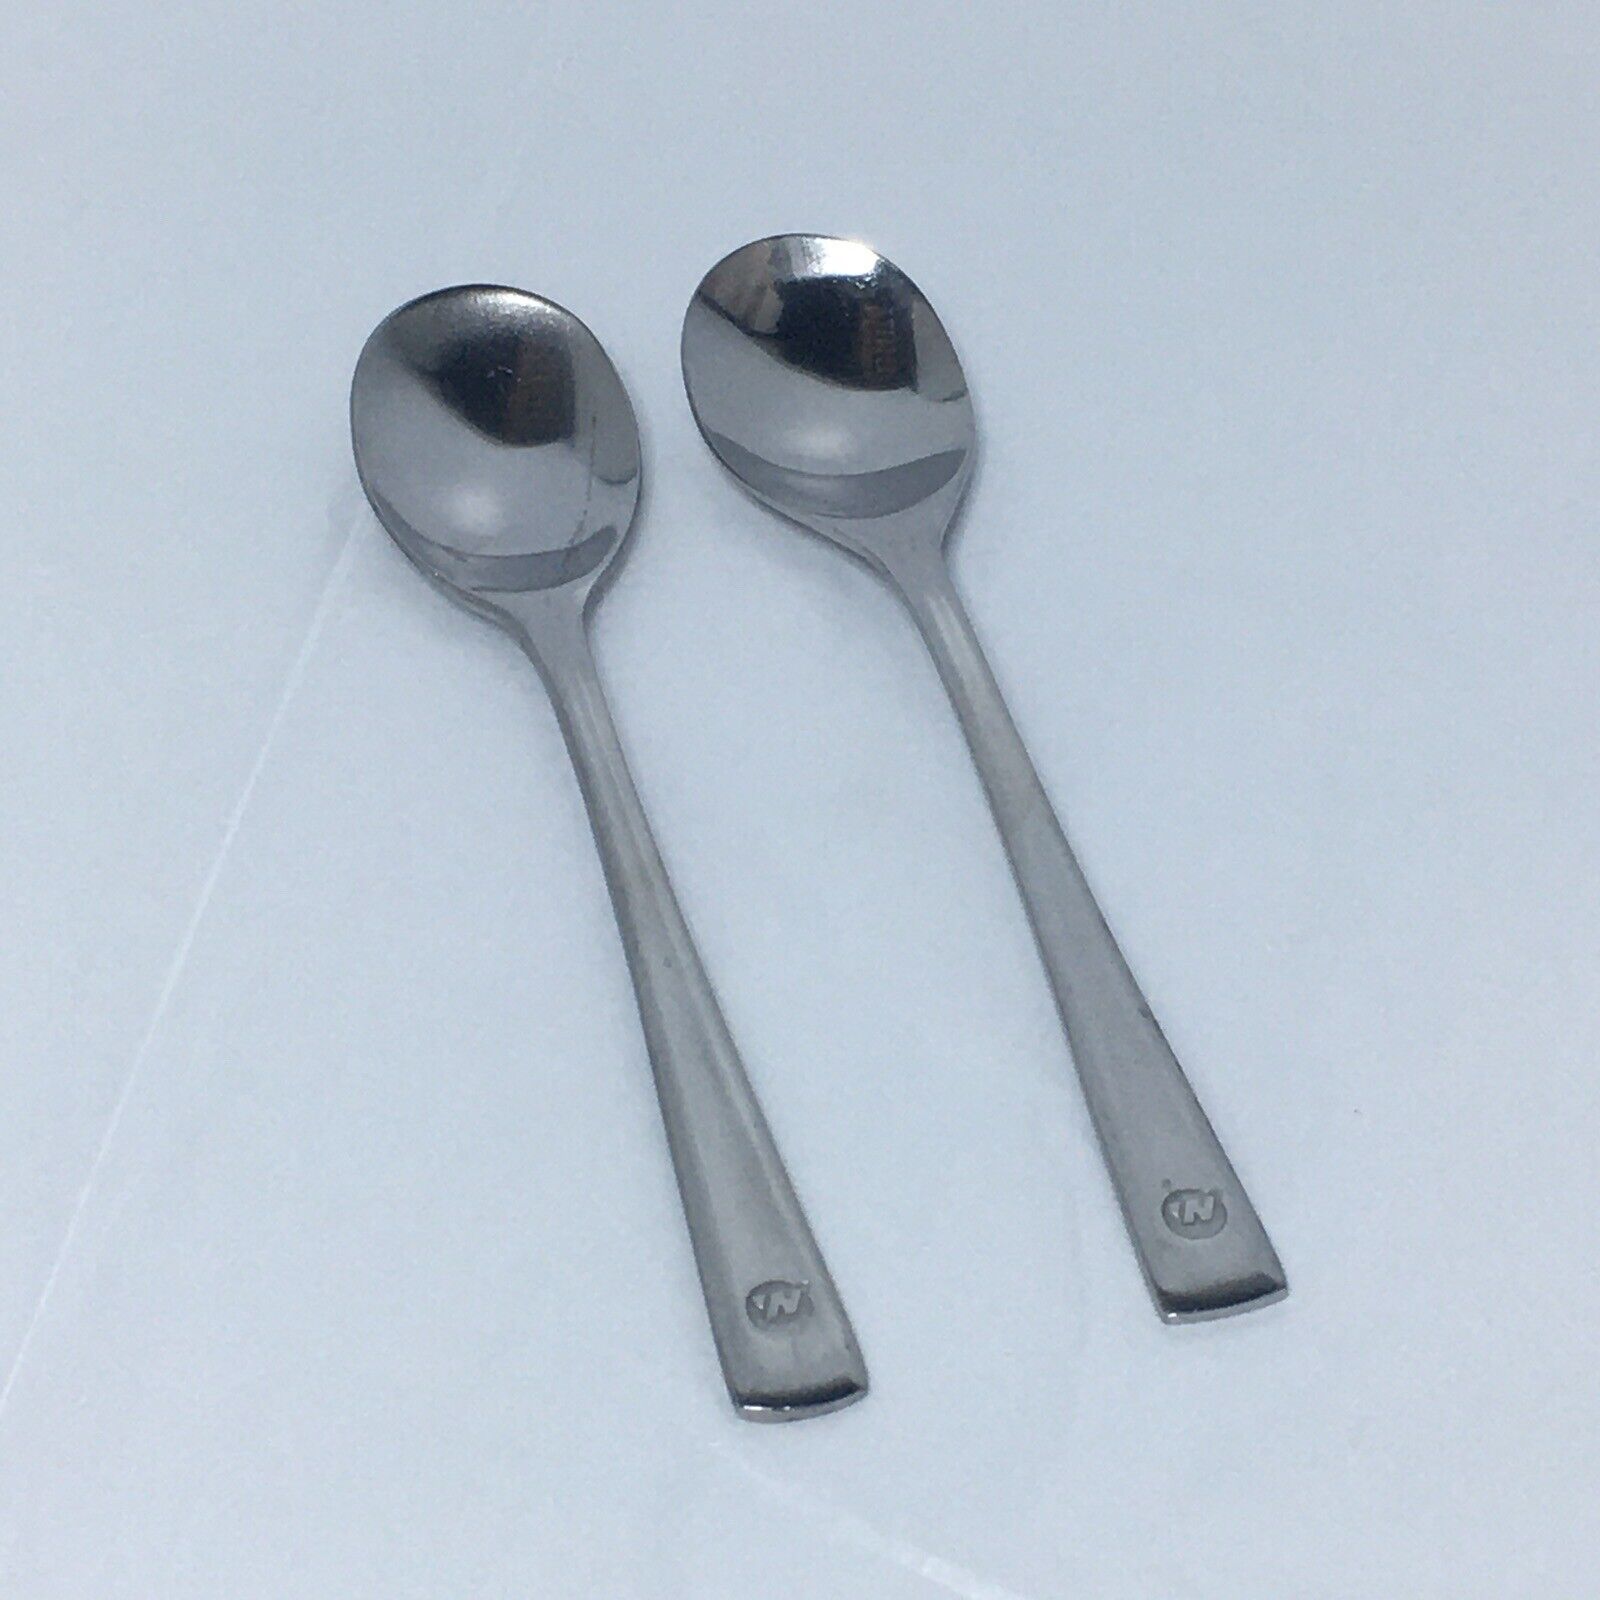 Northwest Airlines 2pc Spoon First Class Flatware NWA Aviation Silverware